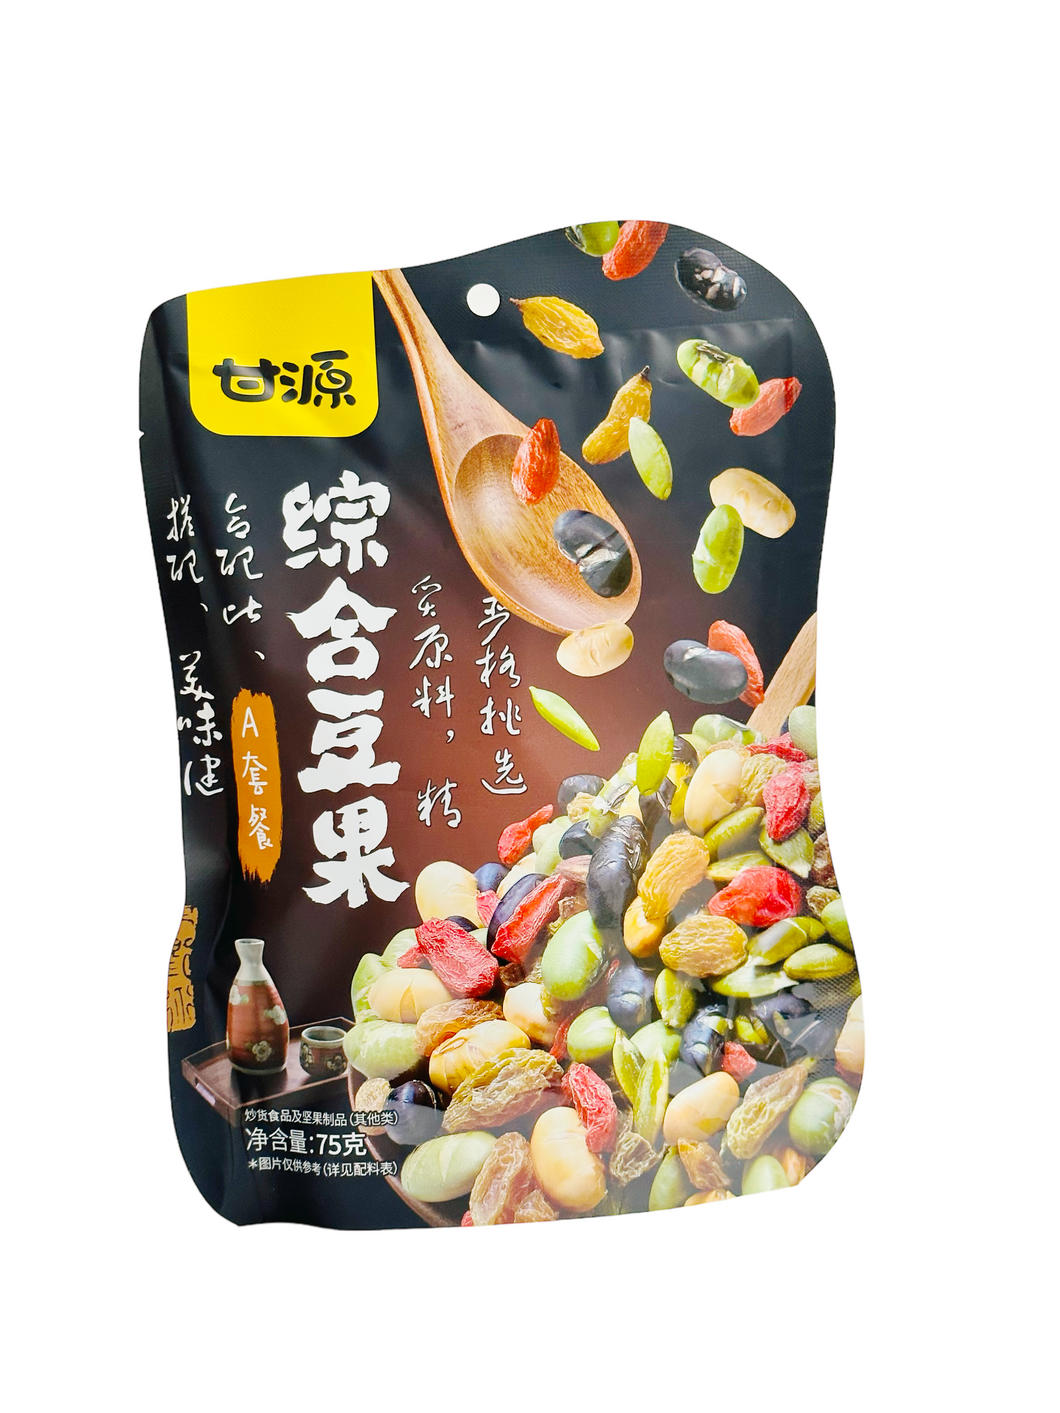 GY Mixed Nuts A 75g 甘源（综合豆果）A套餐